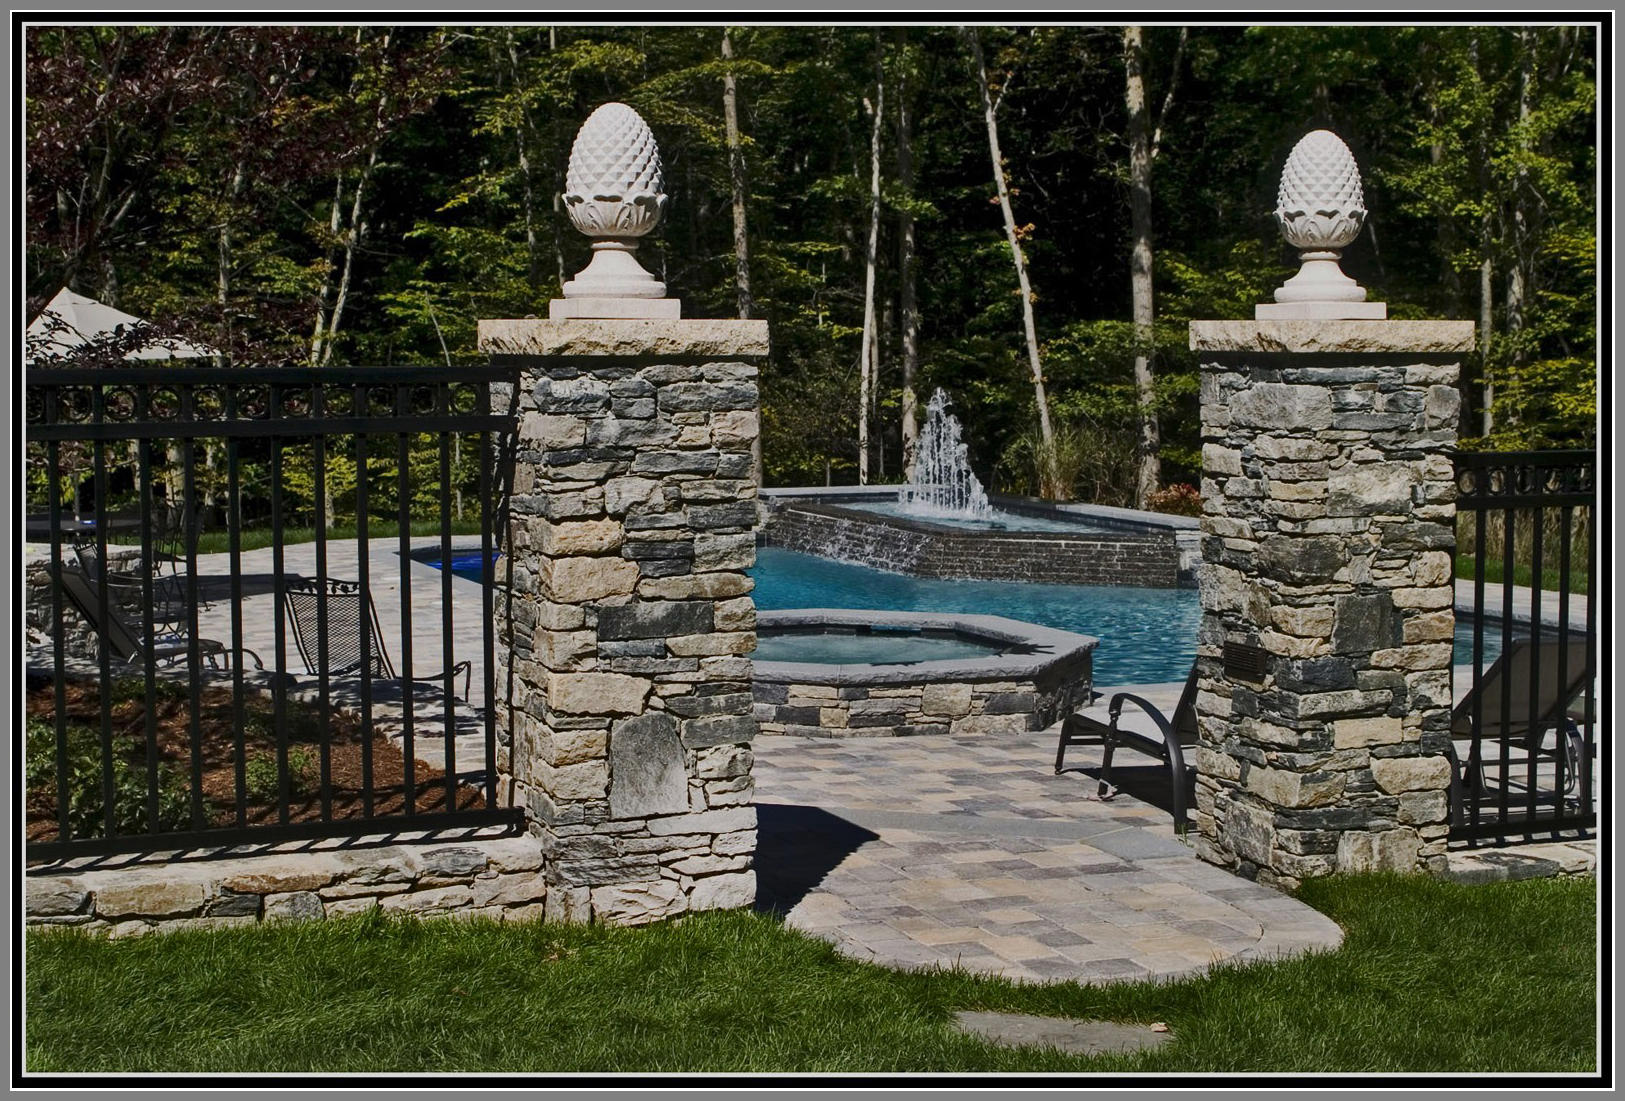 Wrought iron fence and gate with stone columns